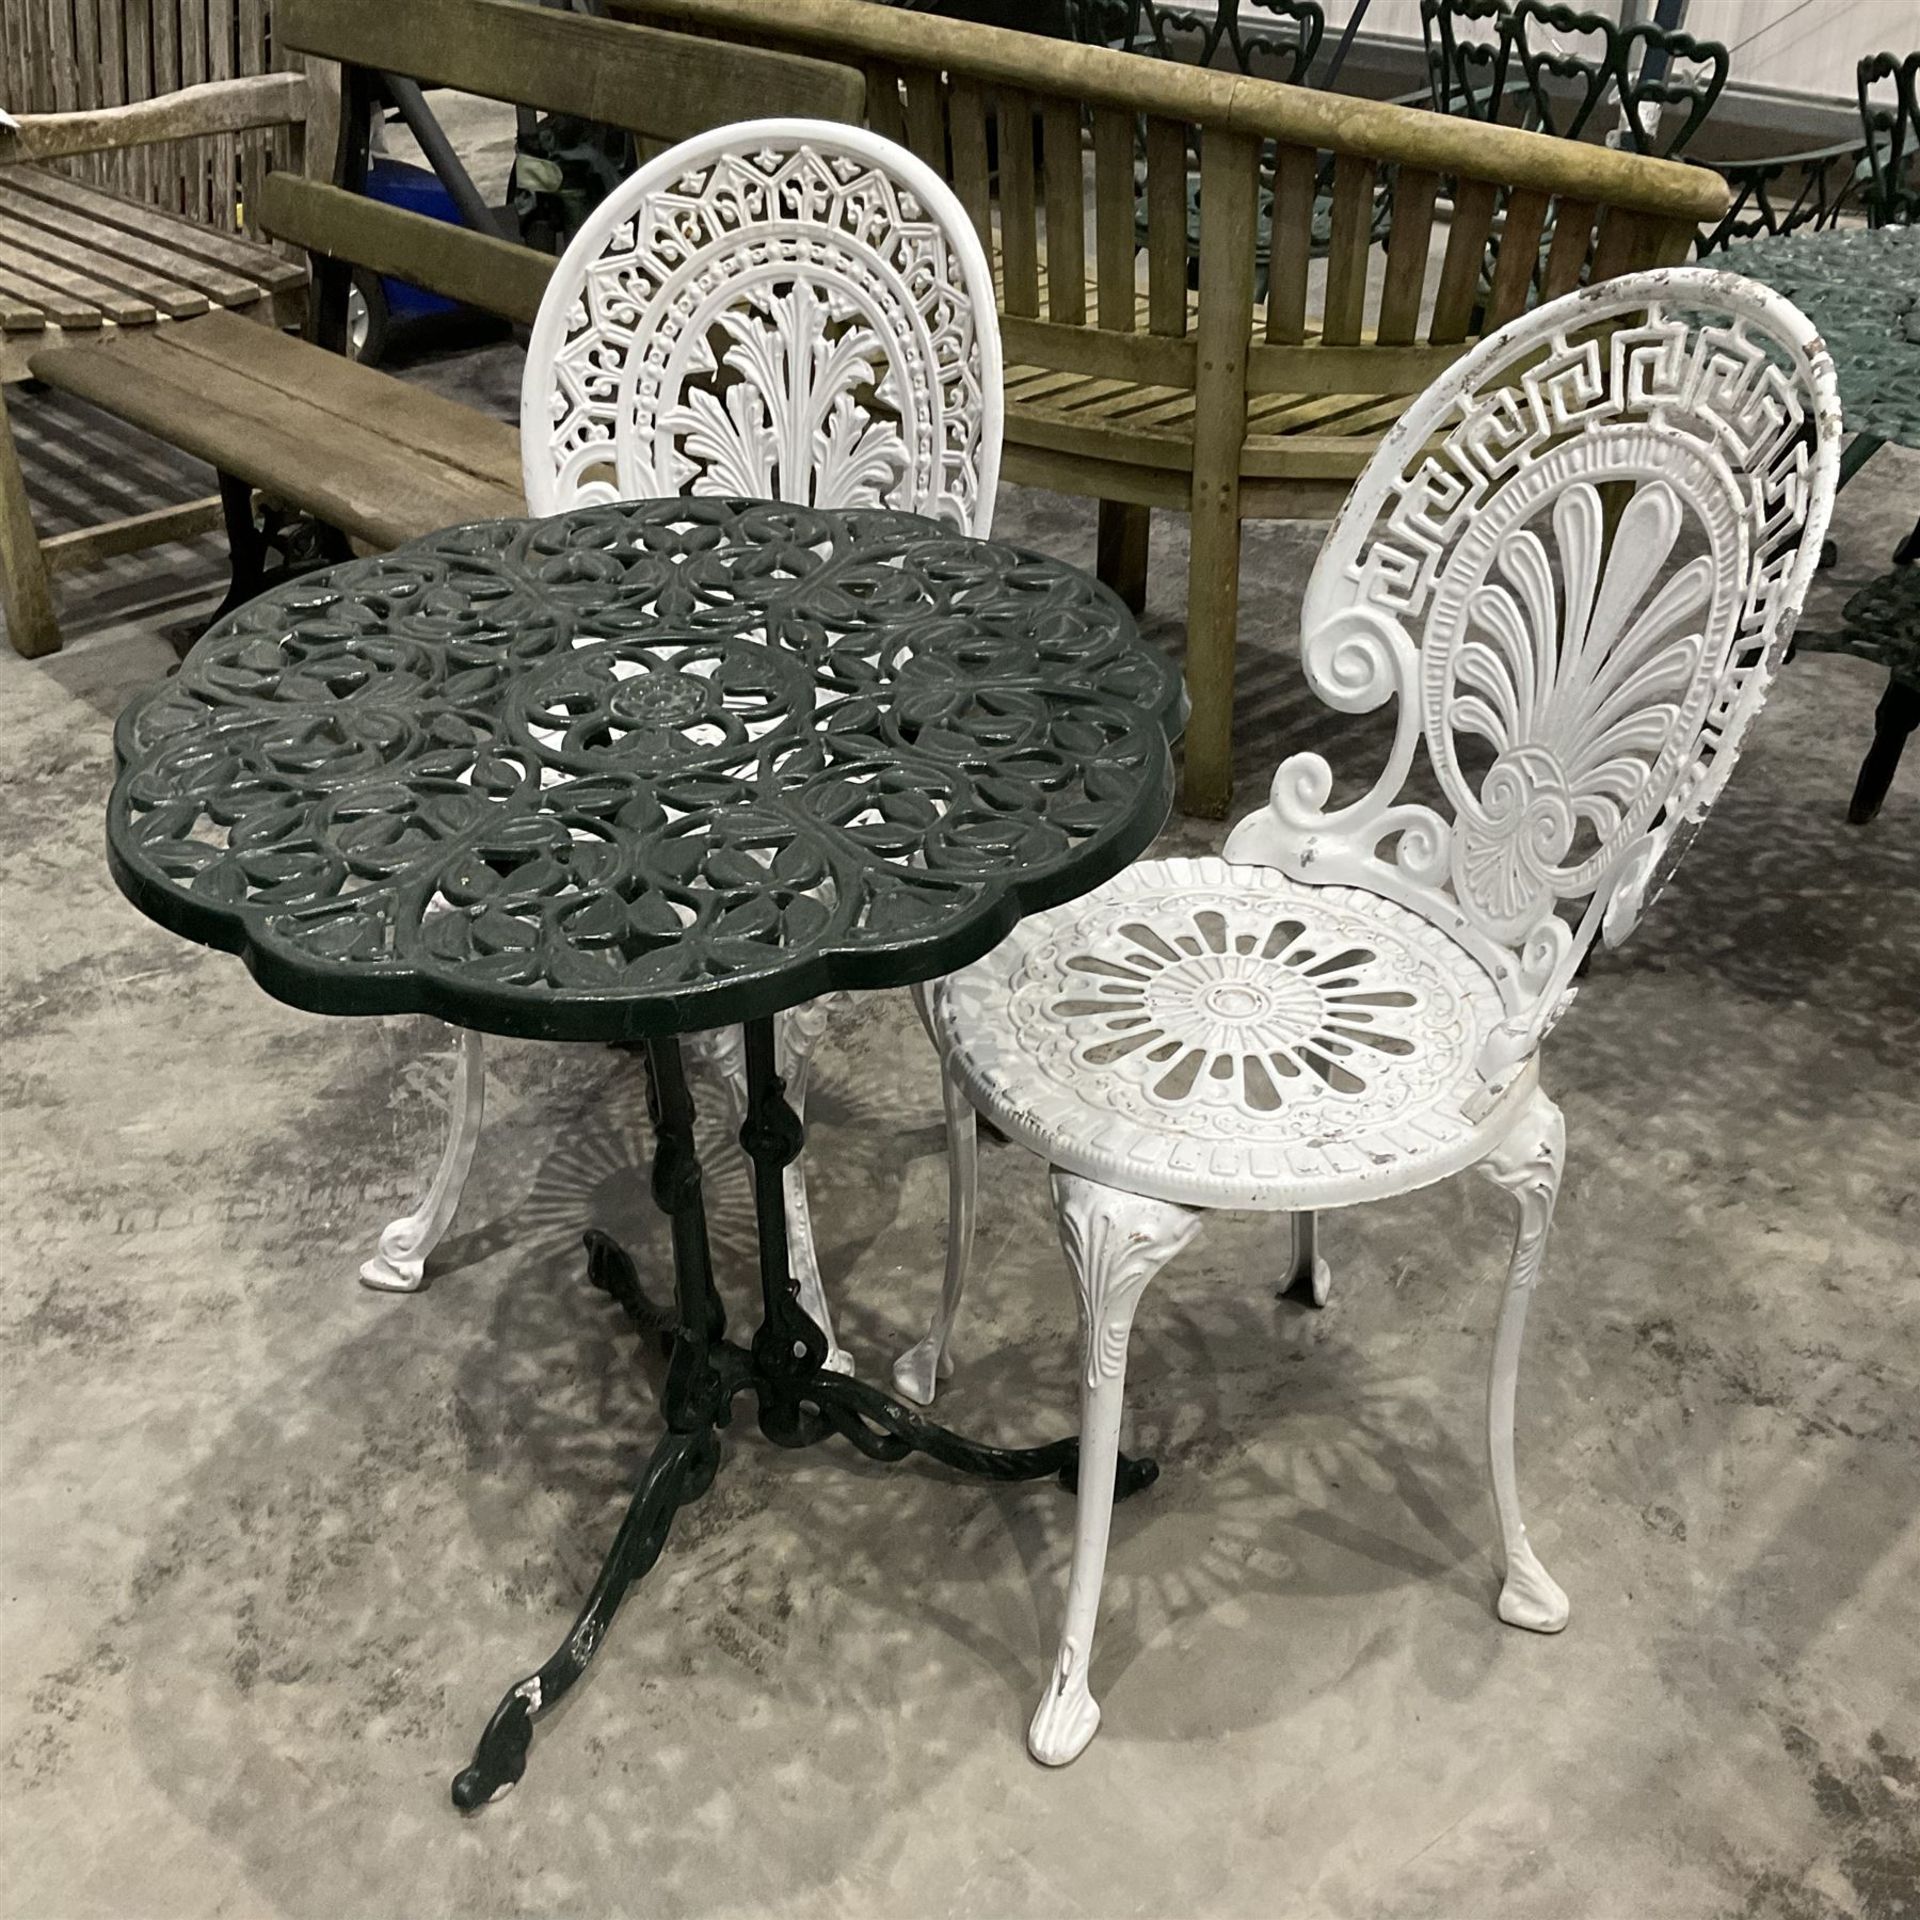 Cast aluminium green painter garden table and white painted chairs